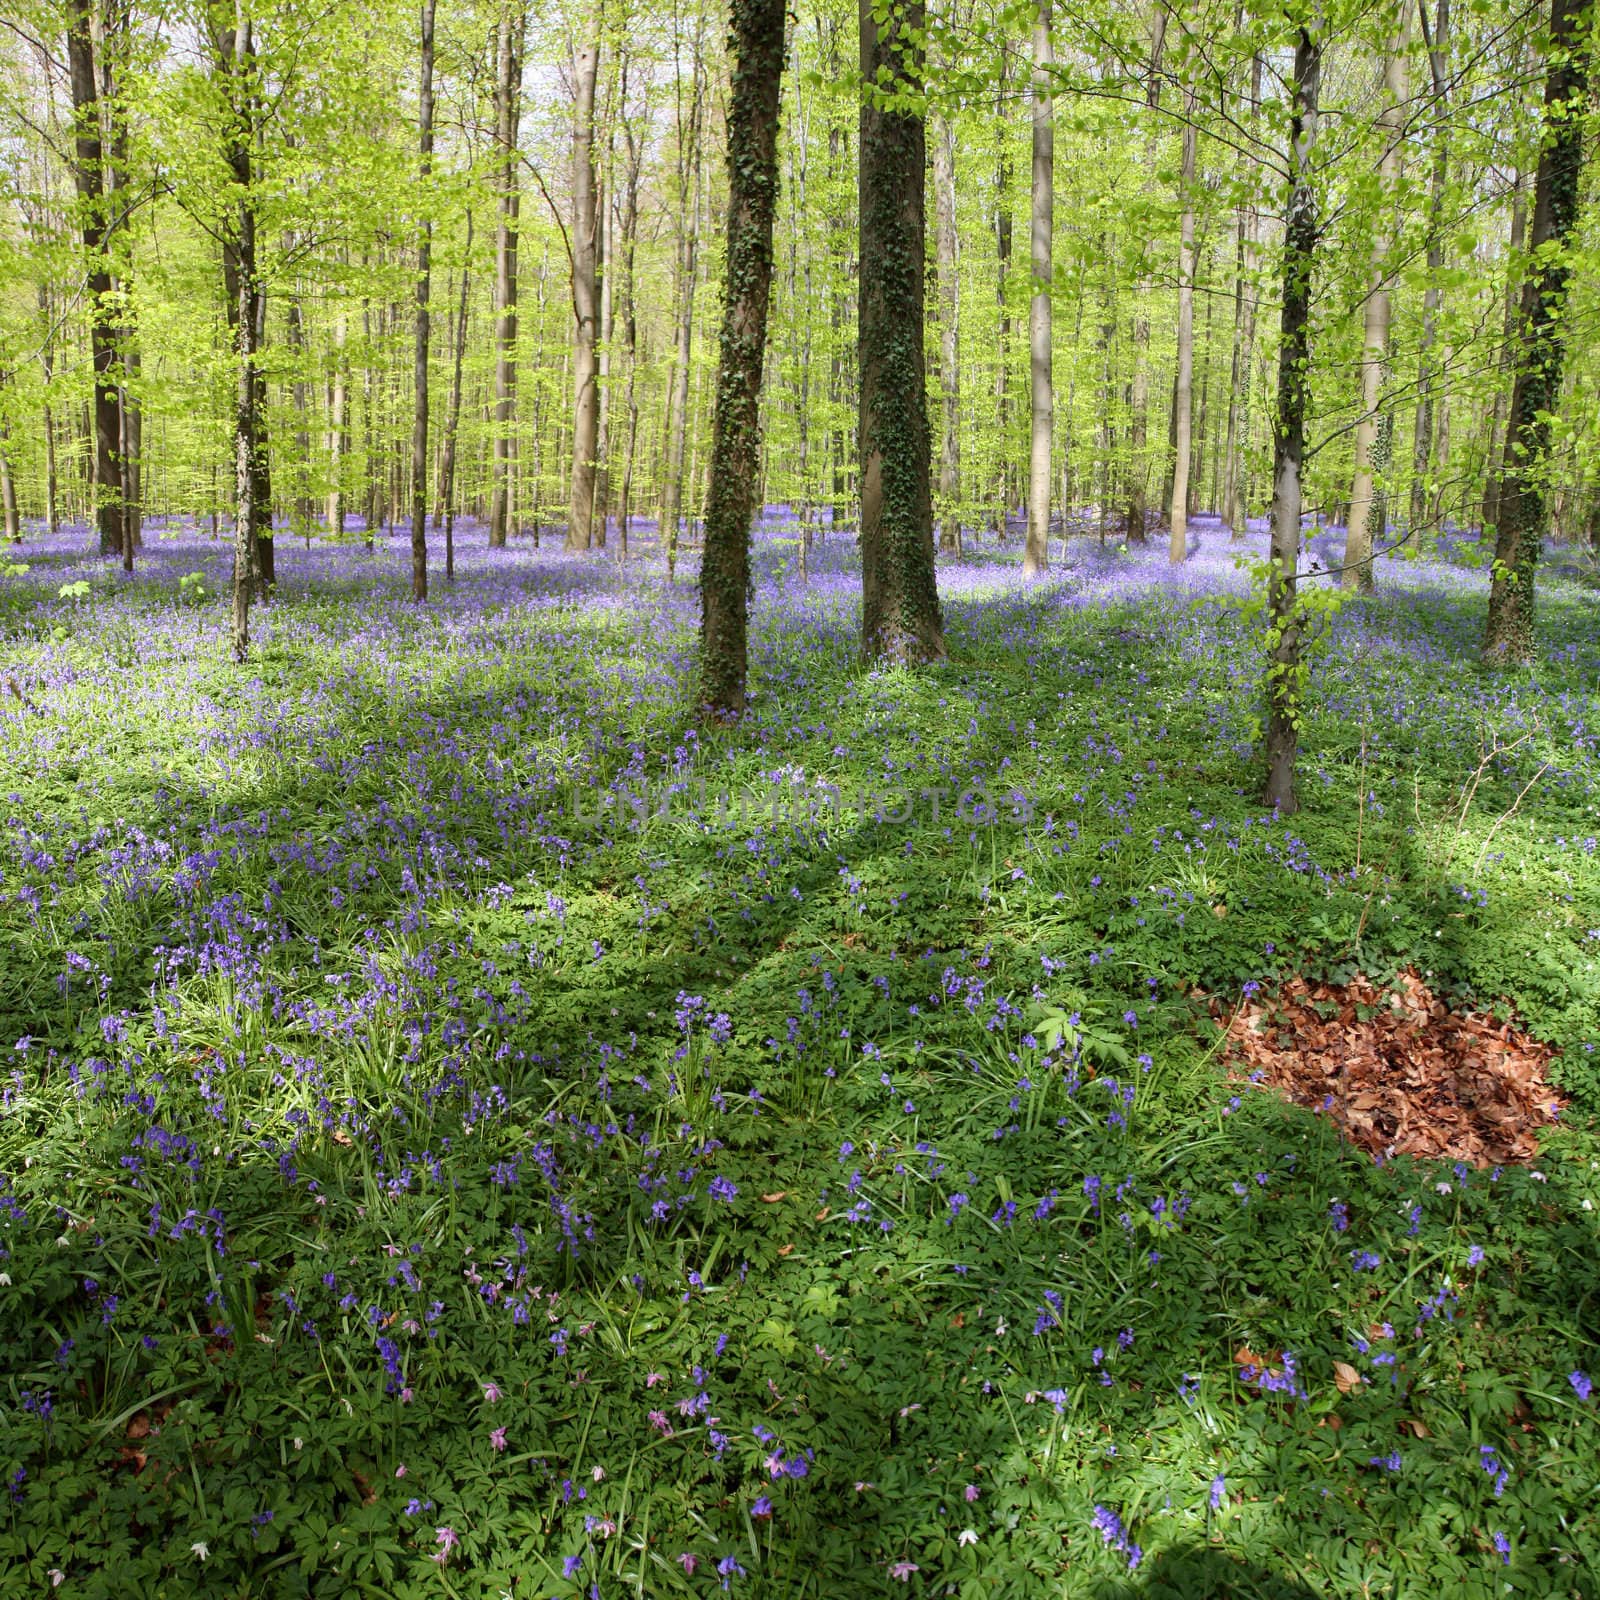 Bluebell in the forest of Halle - in Belgium - very famous for its blue flowers in May